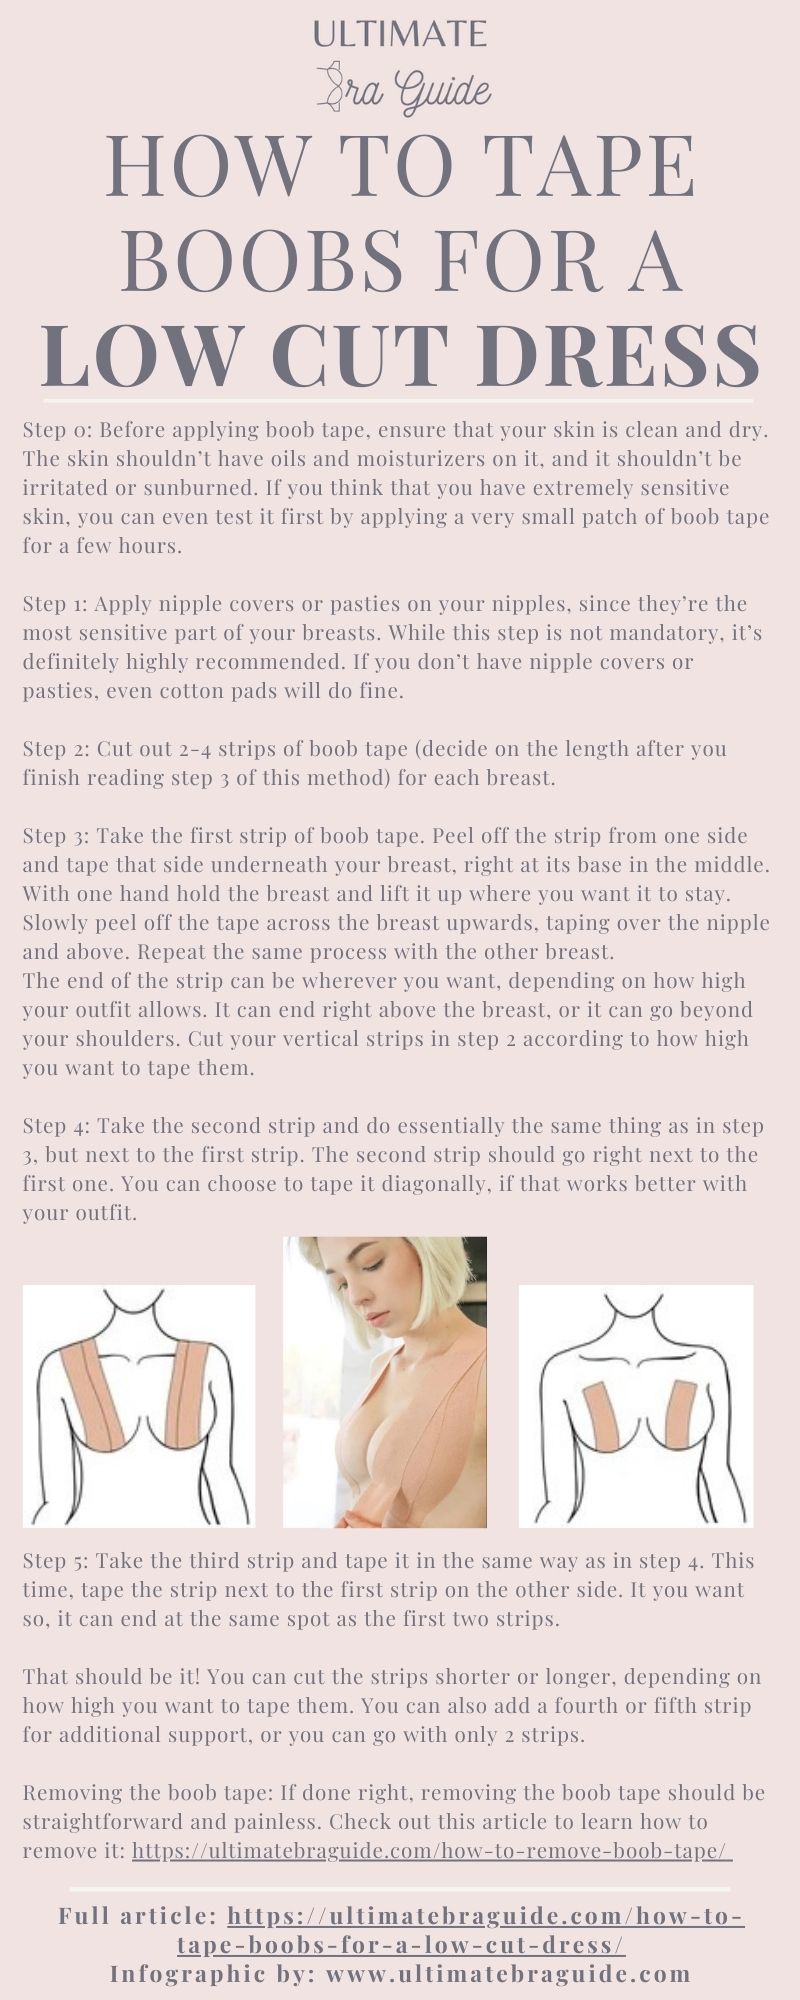 How To Tape Boobs for a Low Cut Dress Infographic - This shows a step by step guide to taping your breasts for a low cut dress